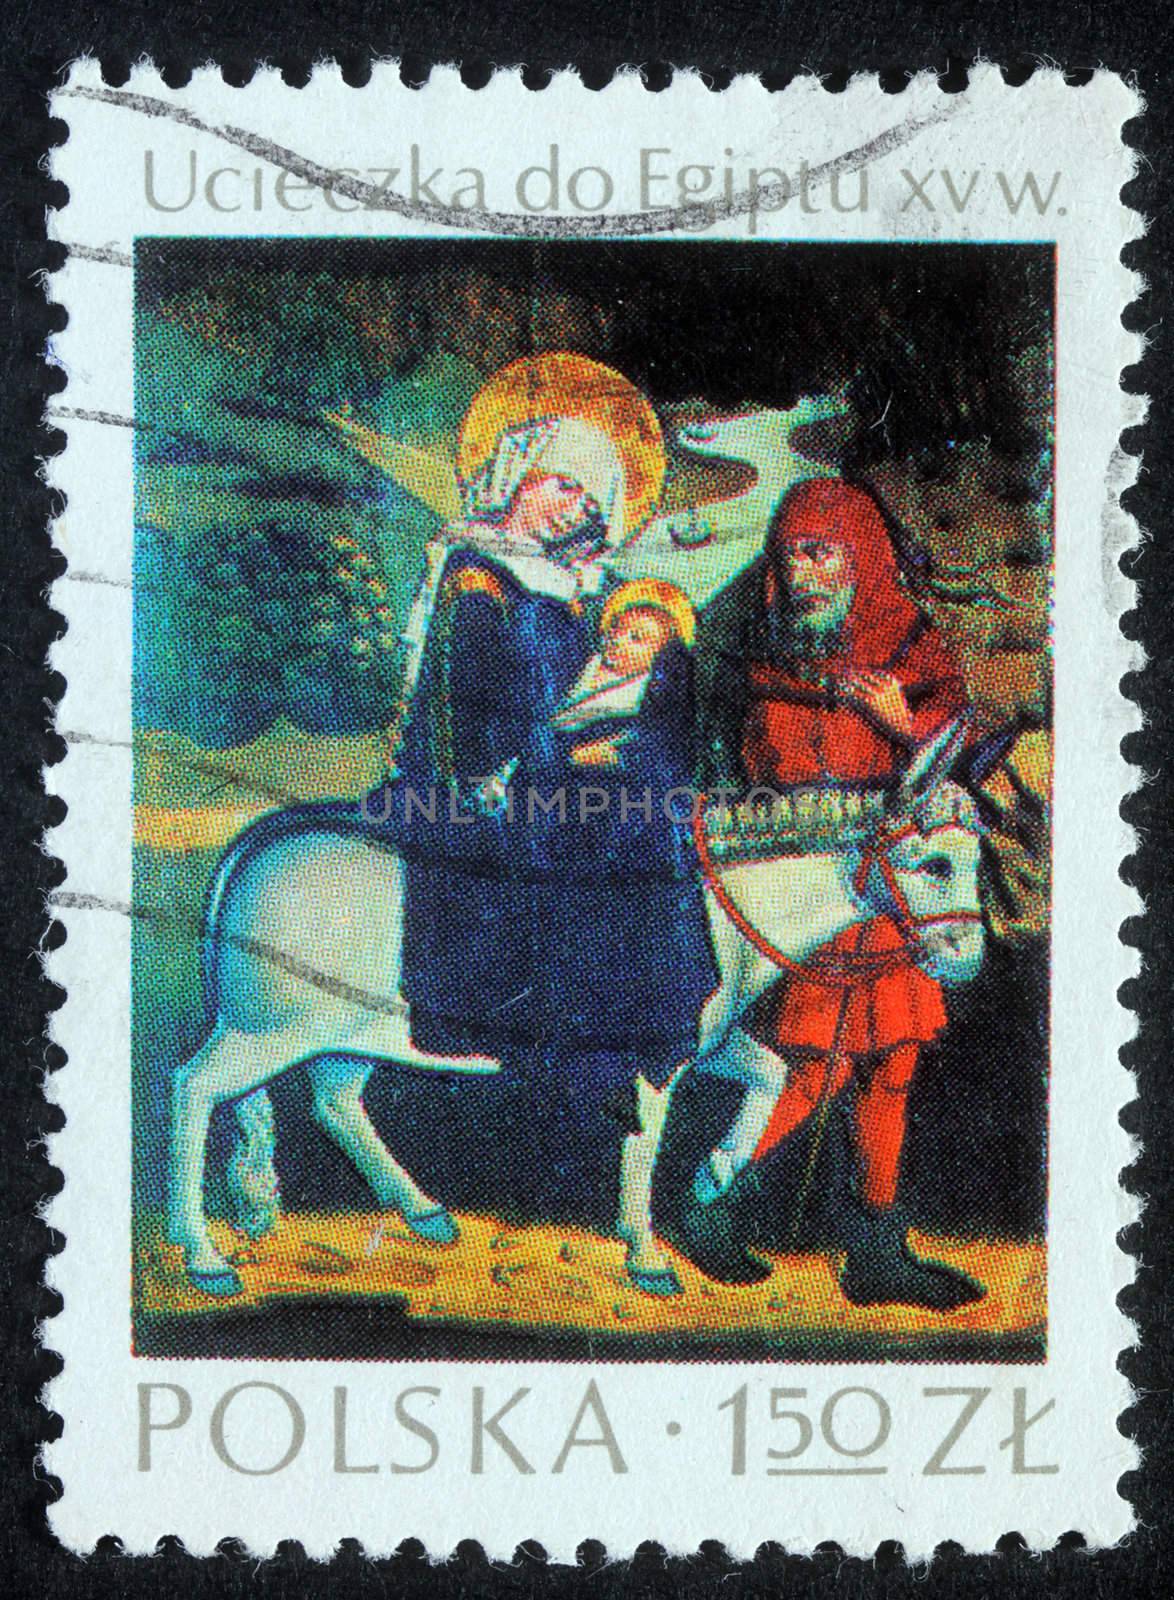 POLAND - CIRCA 1980: A greeting Christmas stamp printed in Poland shows Flight to Egypt